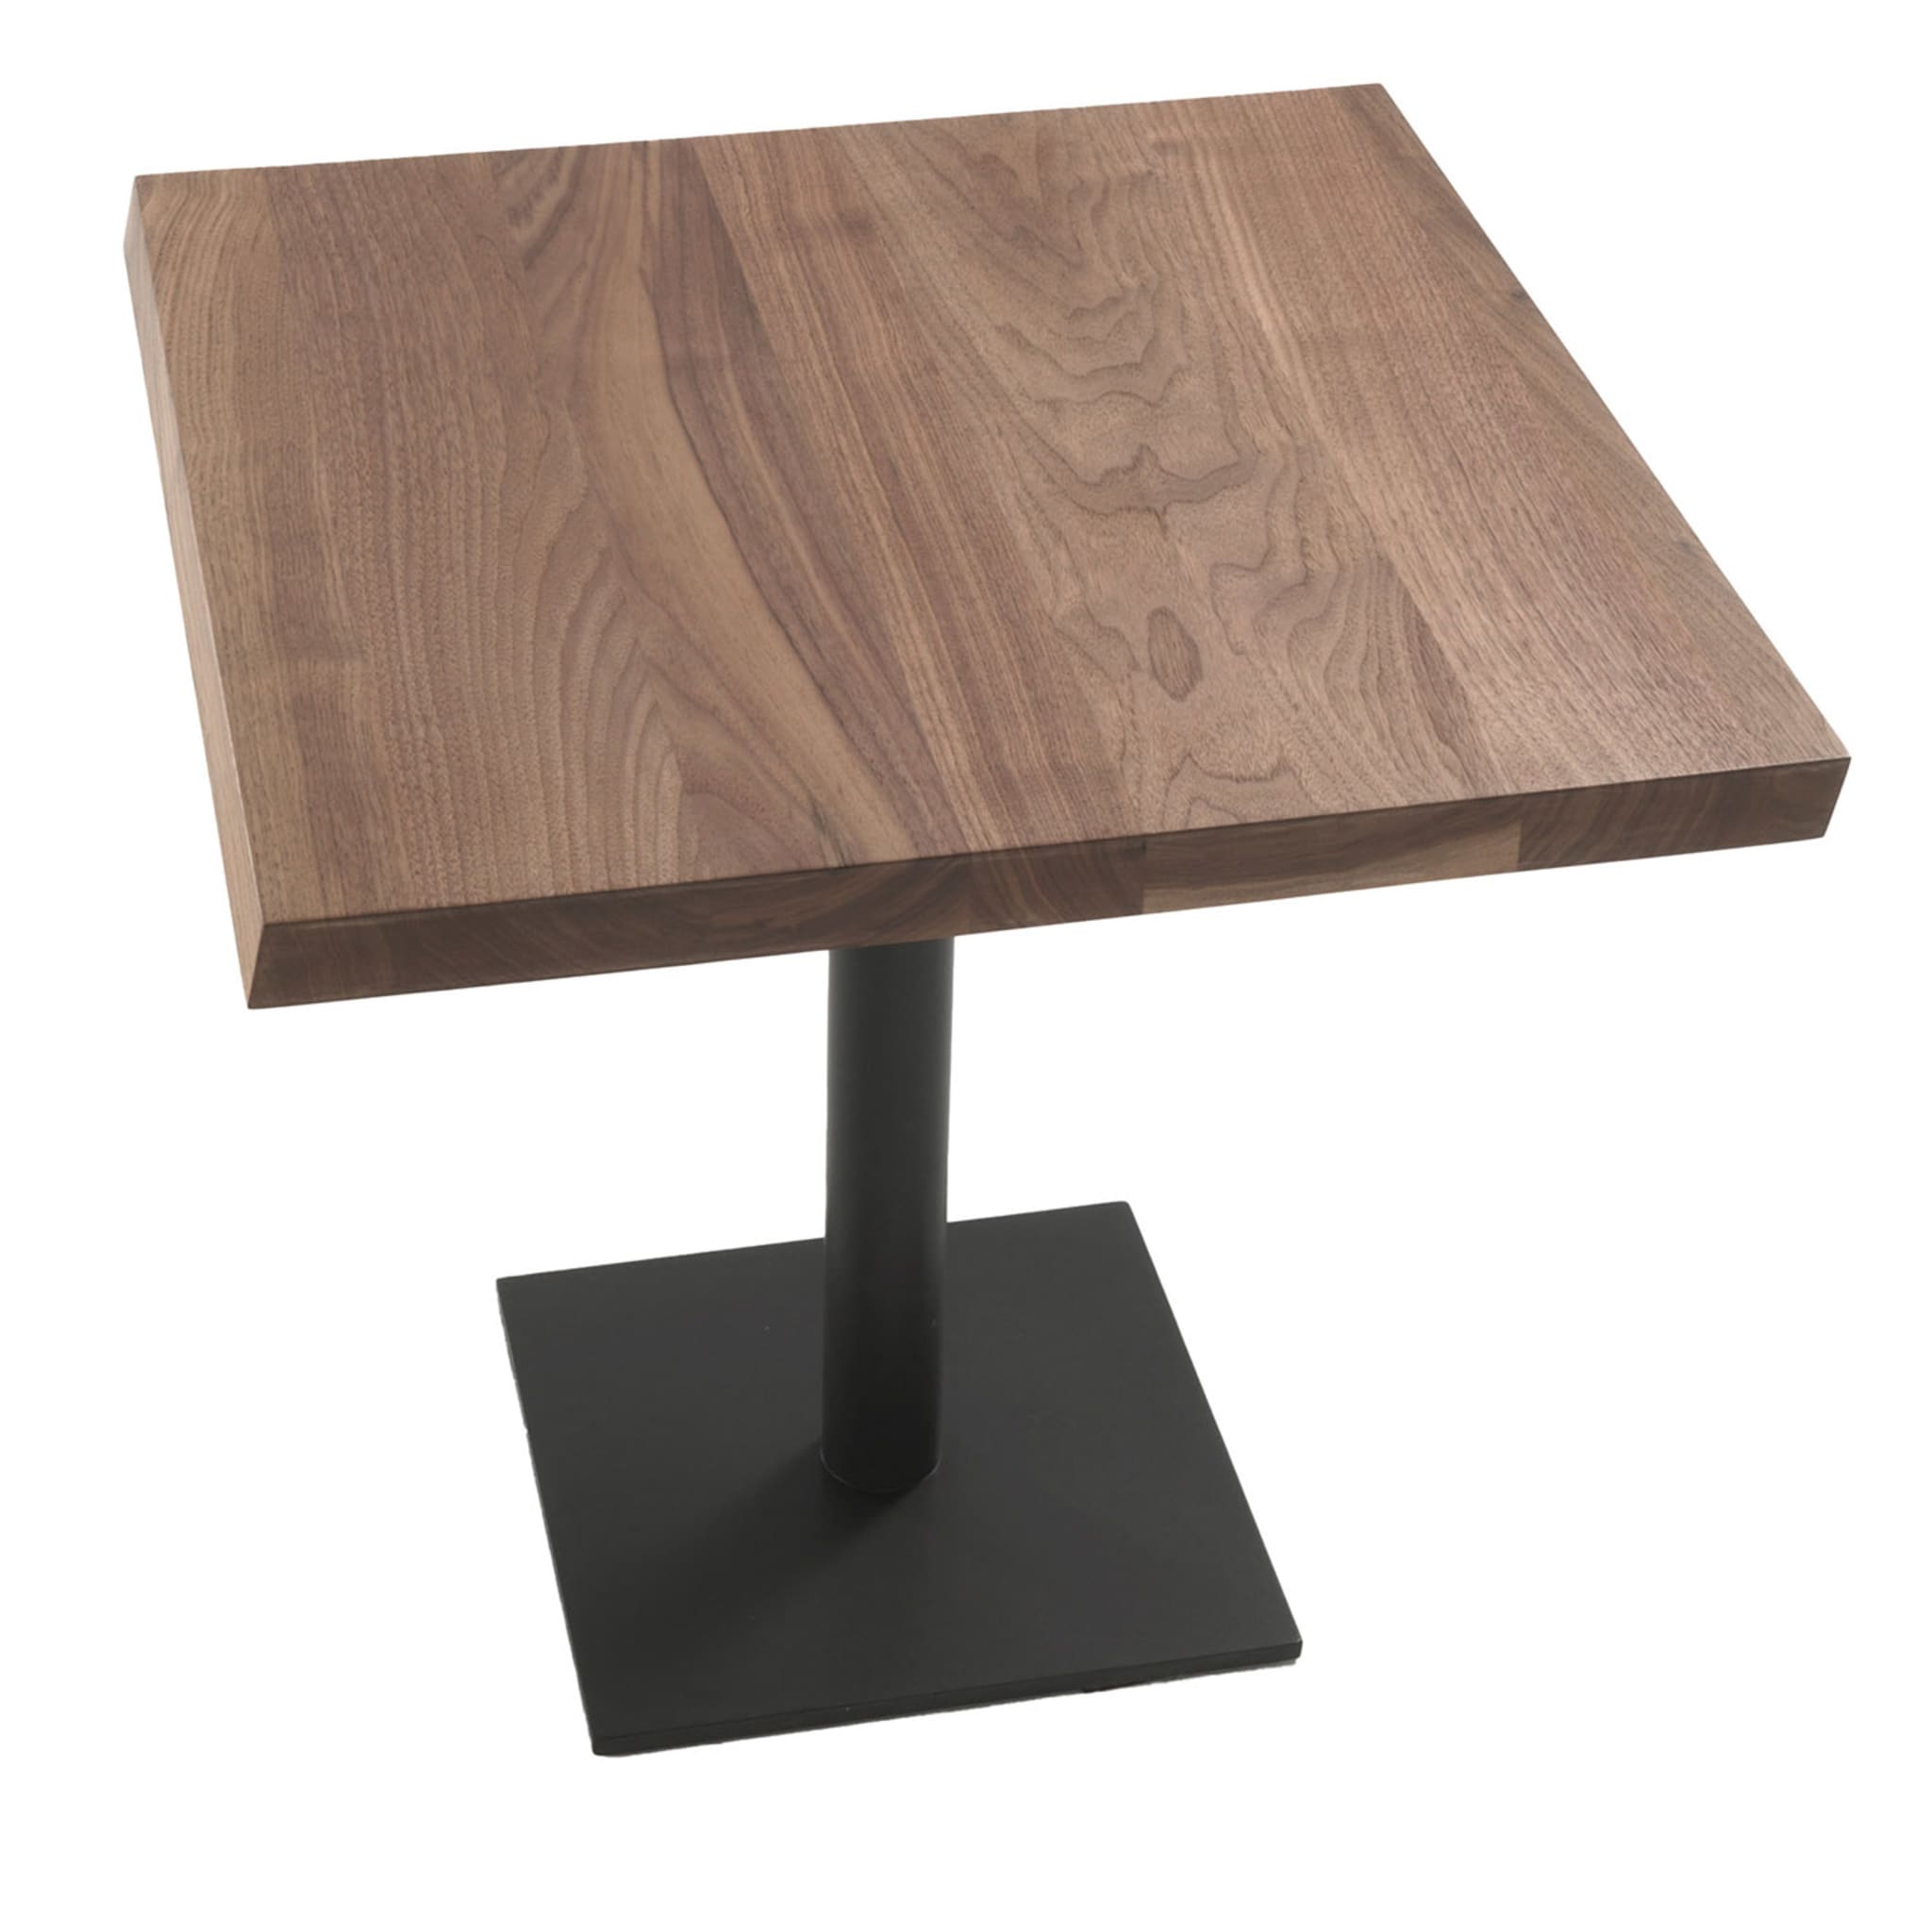 Pebbles Small Square Coffee Table by Terry Dwan - Alternative view 1